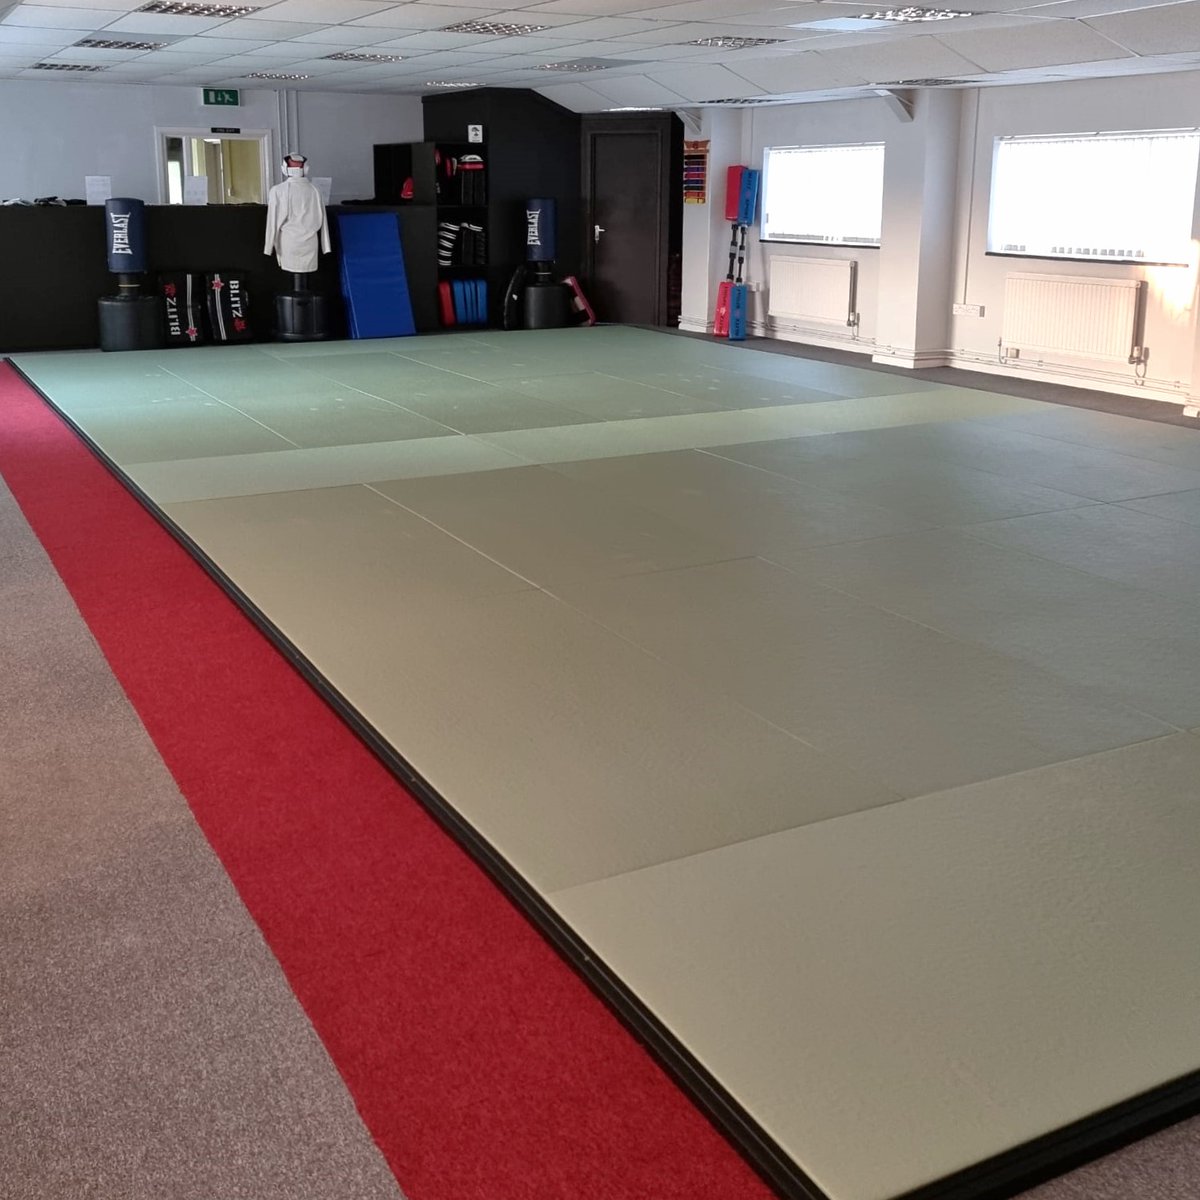 📢 CALLING ALL YOGA AND PILATES INSTRUCTORS 📢

We are looking to rent out our padded dojo in Letchworth during the day and the occasional evening to any yoga/pilates classes, or anything similar which may need a padded floor!

#GoshinKarate #PaddedFloor #Dojo #RoomToRent